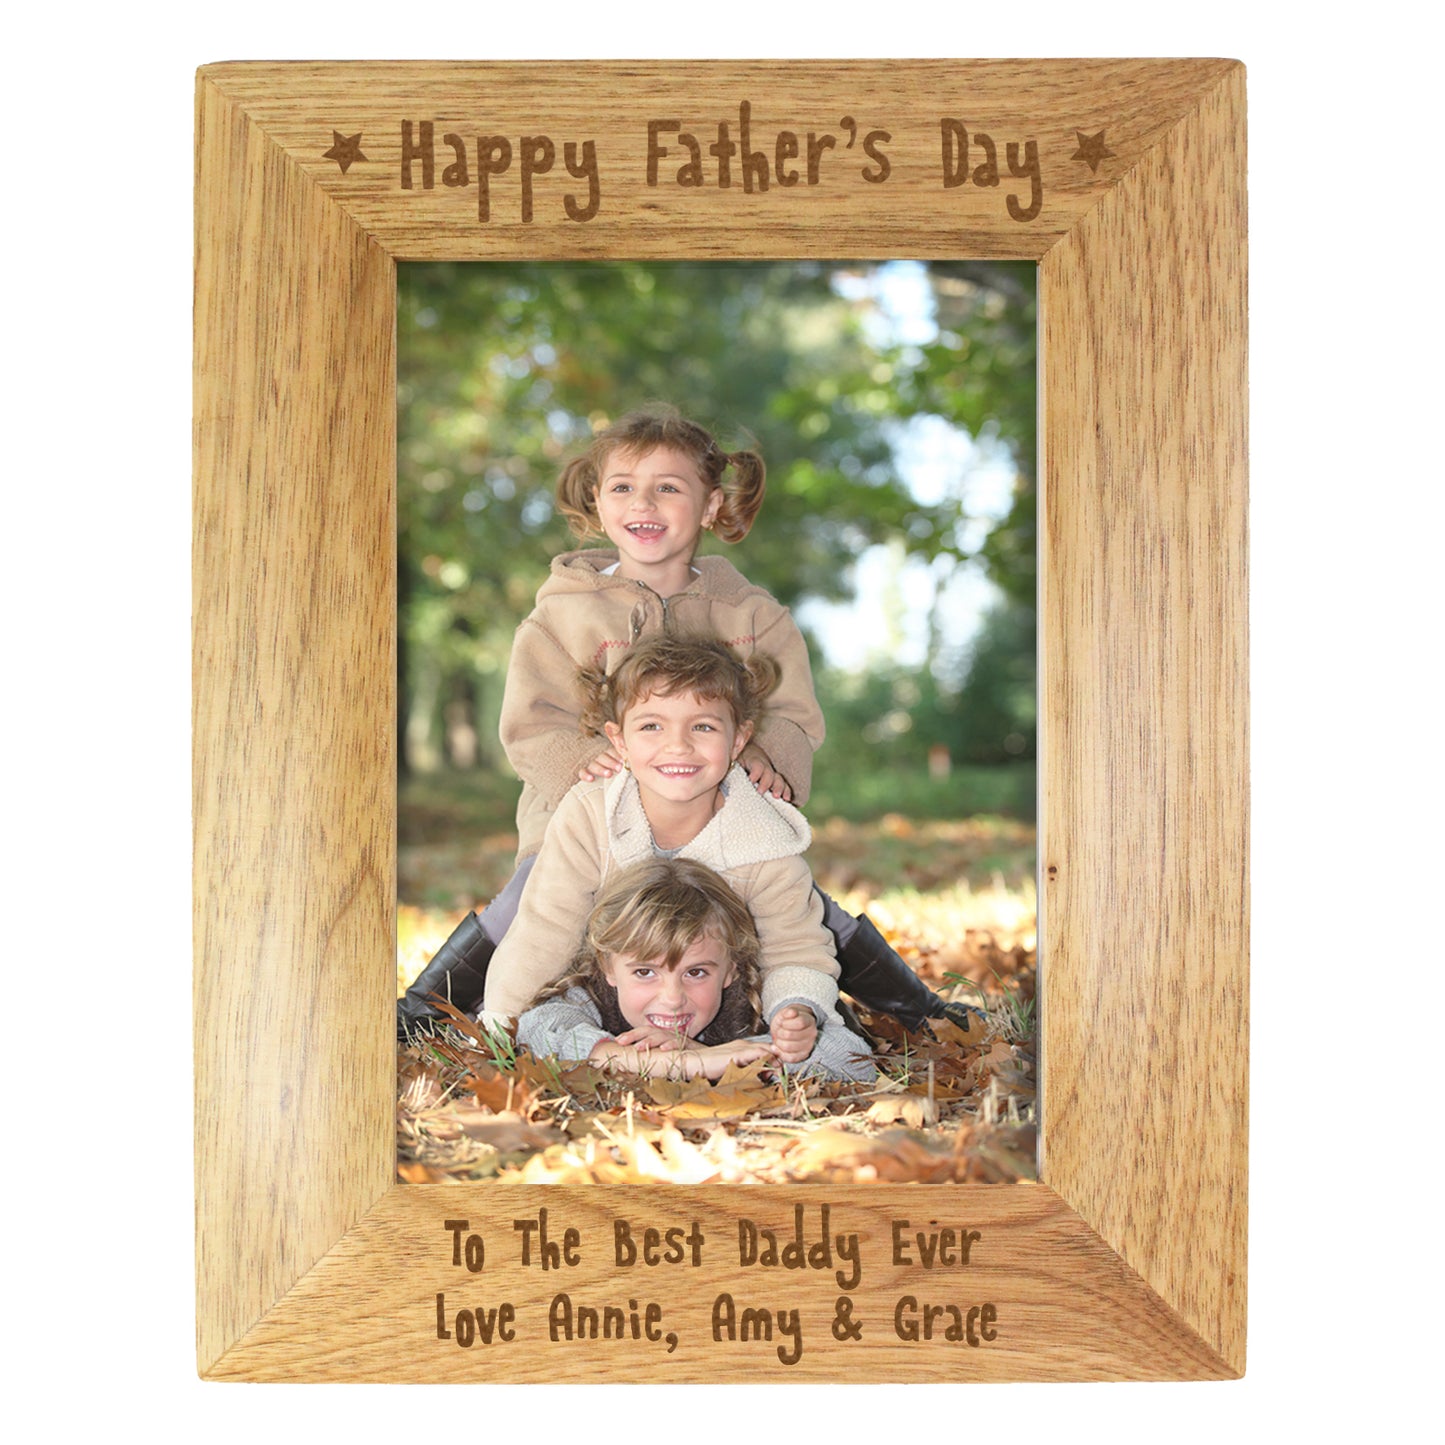 Wooden frame holding 5 x 7 inch photo. Happy Father's Day at the top of the frame and your own message at the foot of the frame.